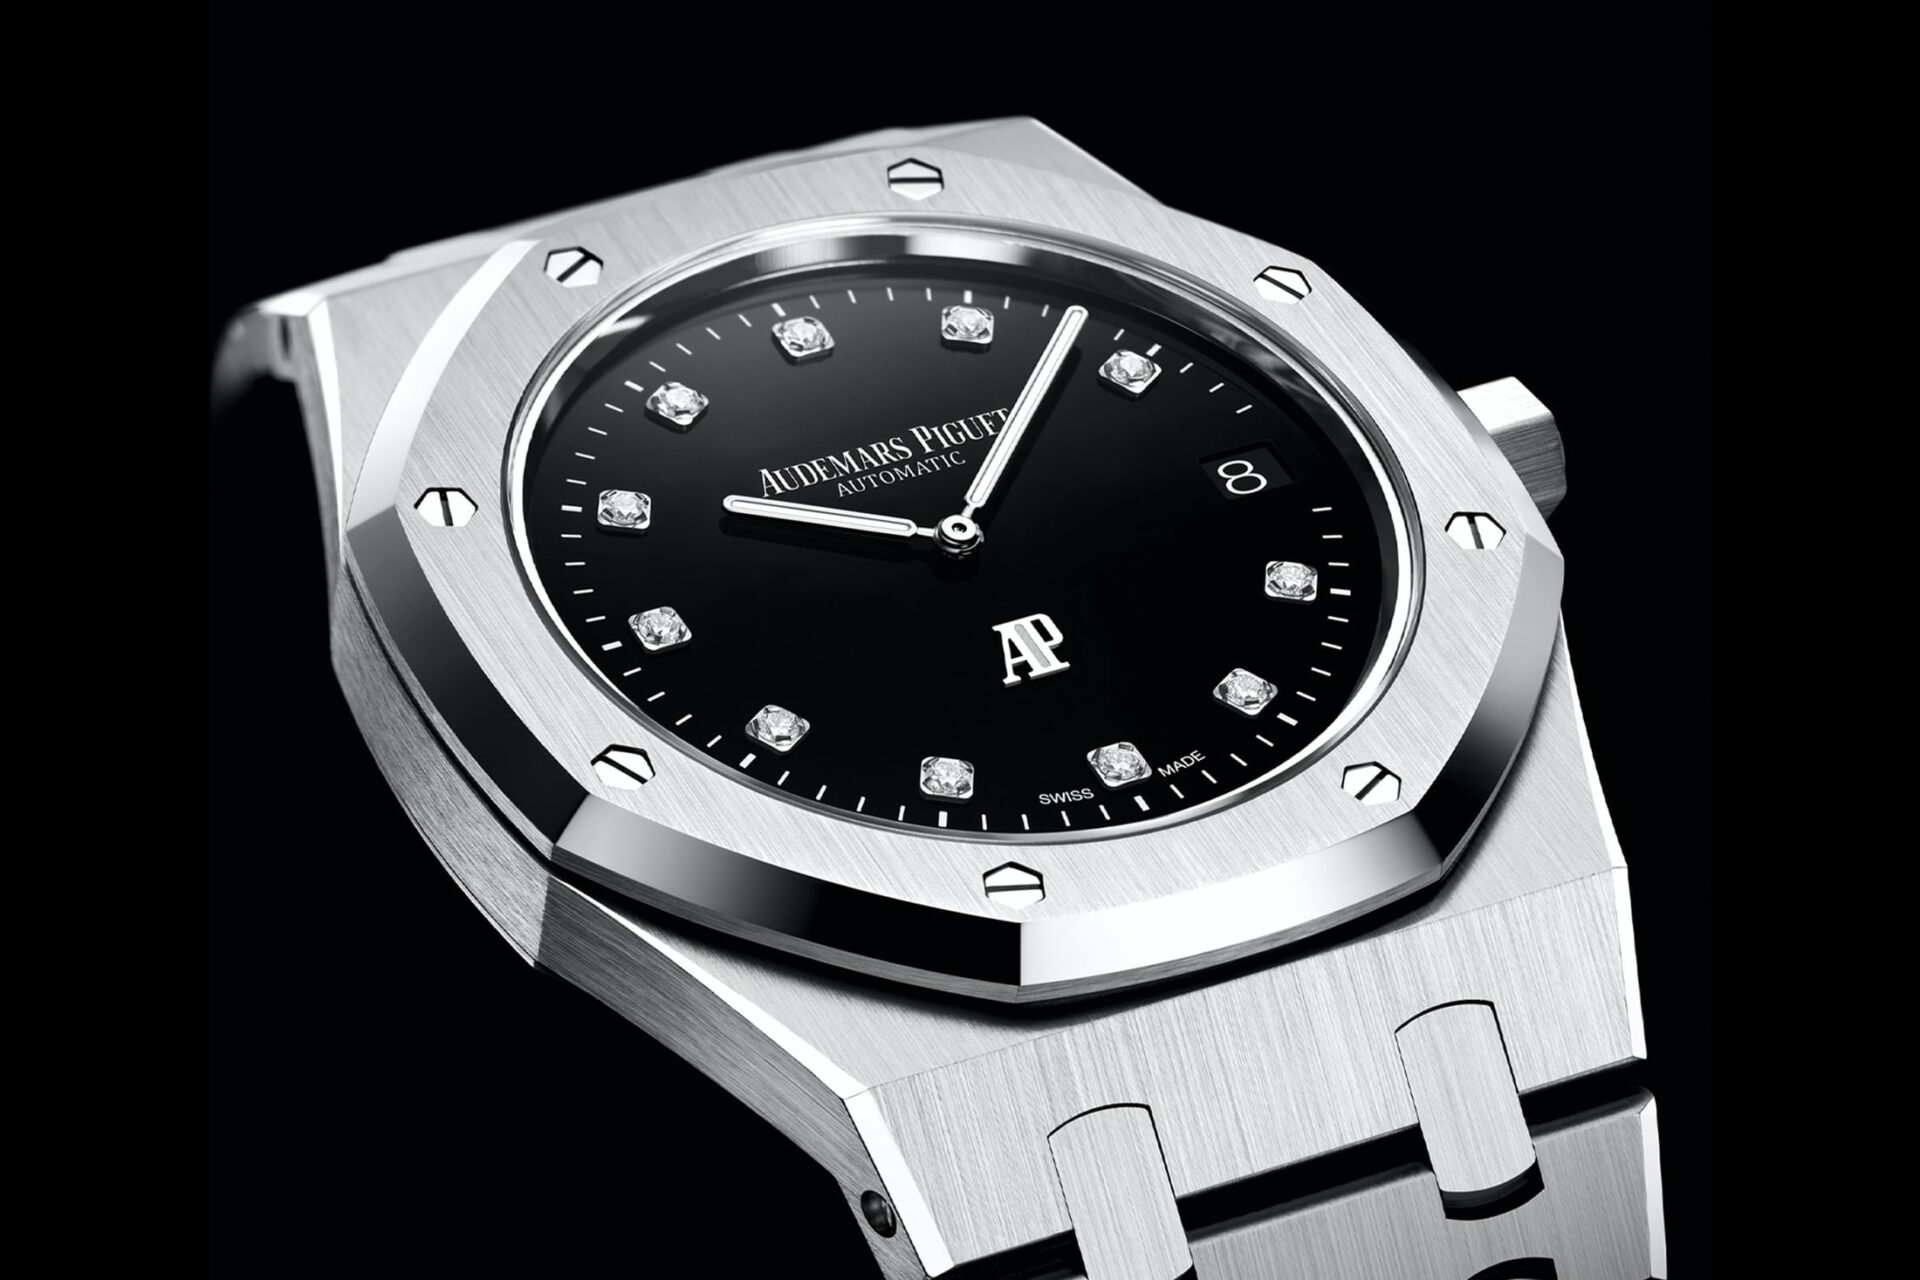 The liquid depth of Audemars Piguet’s Royal Oak Jumbo Extra-Thin with onyx dial is worth travelling to Japan for